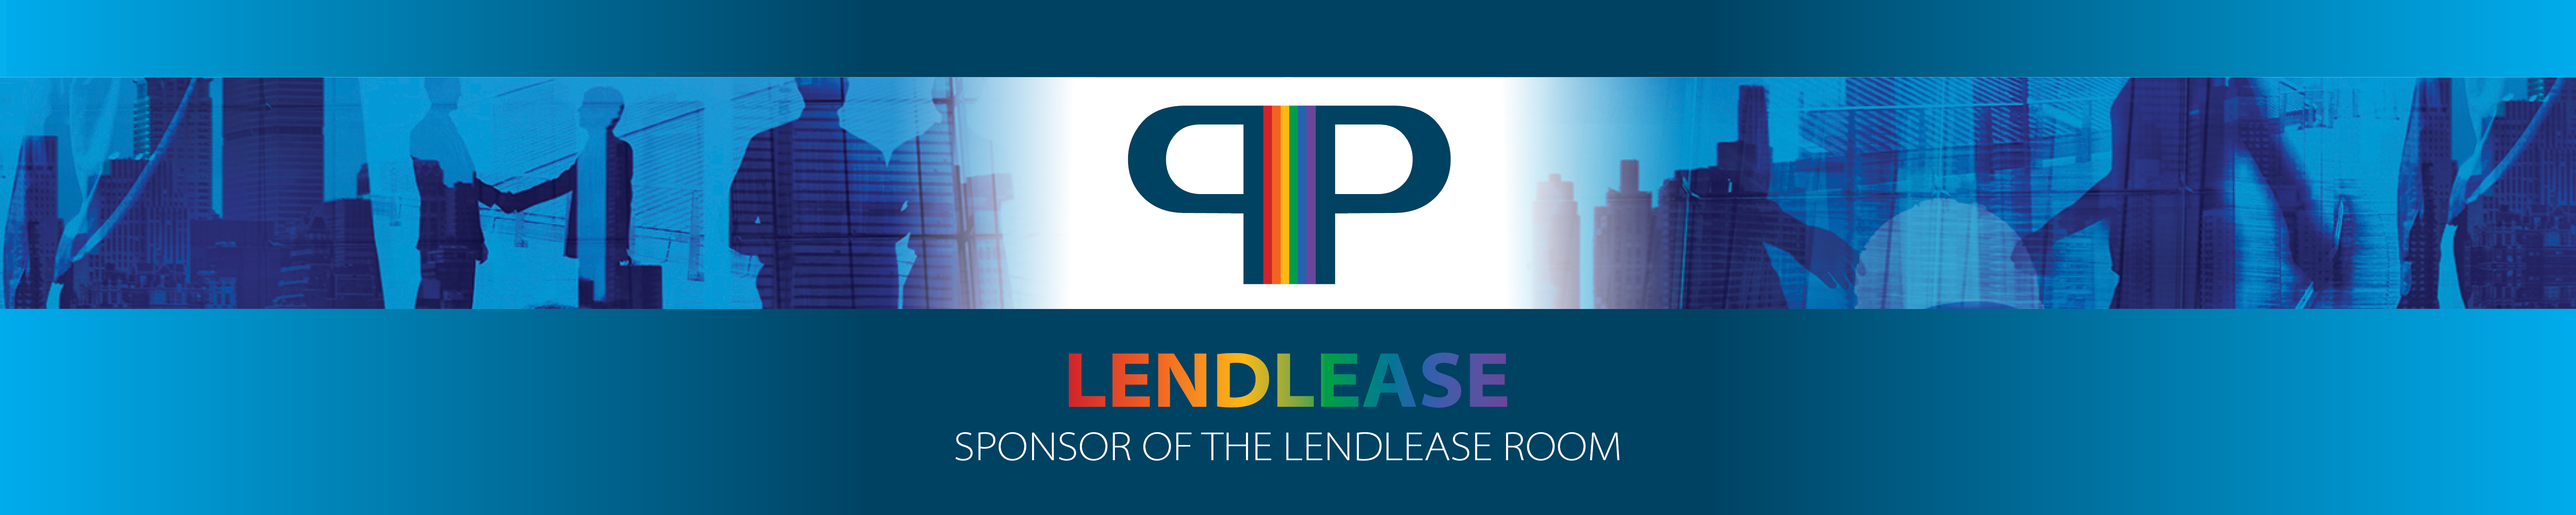 PIP_Conference_Lendlease